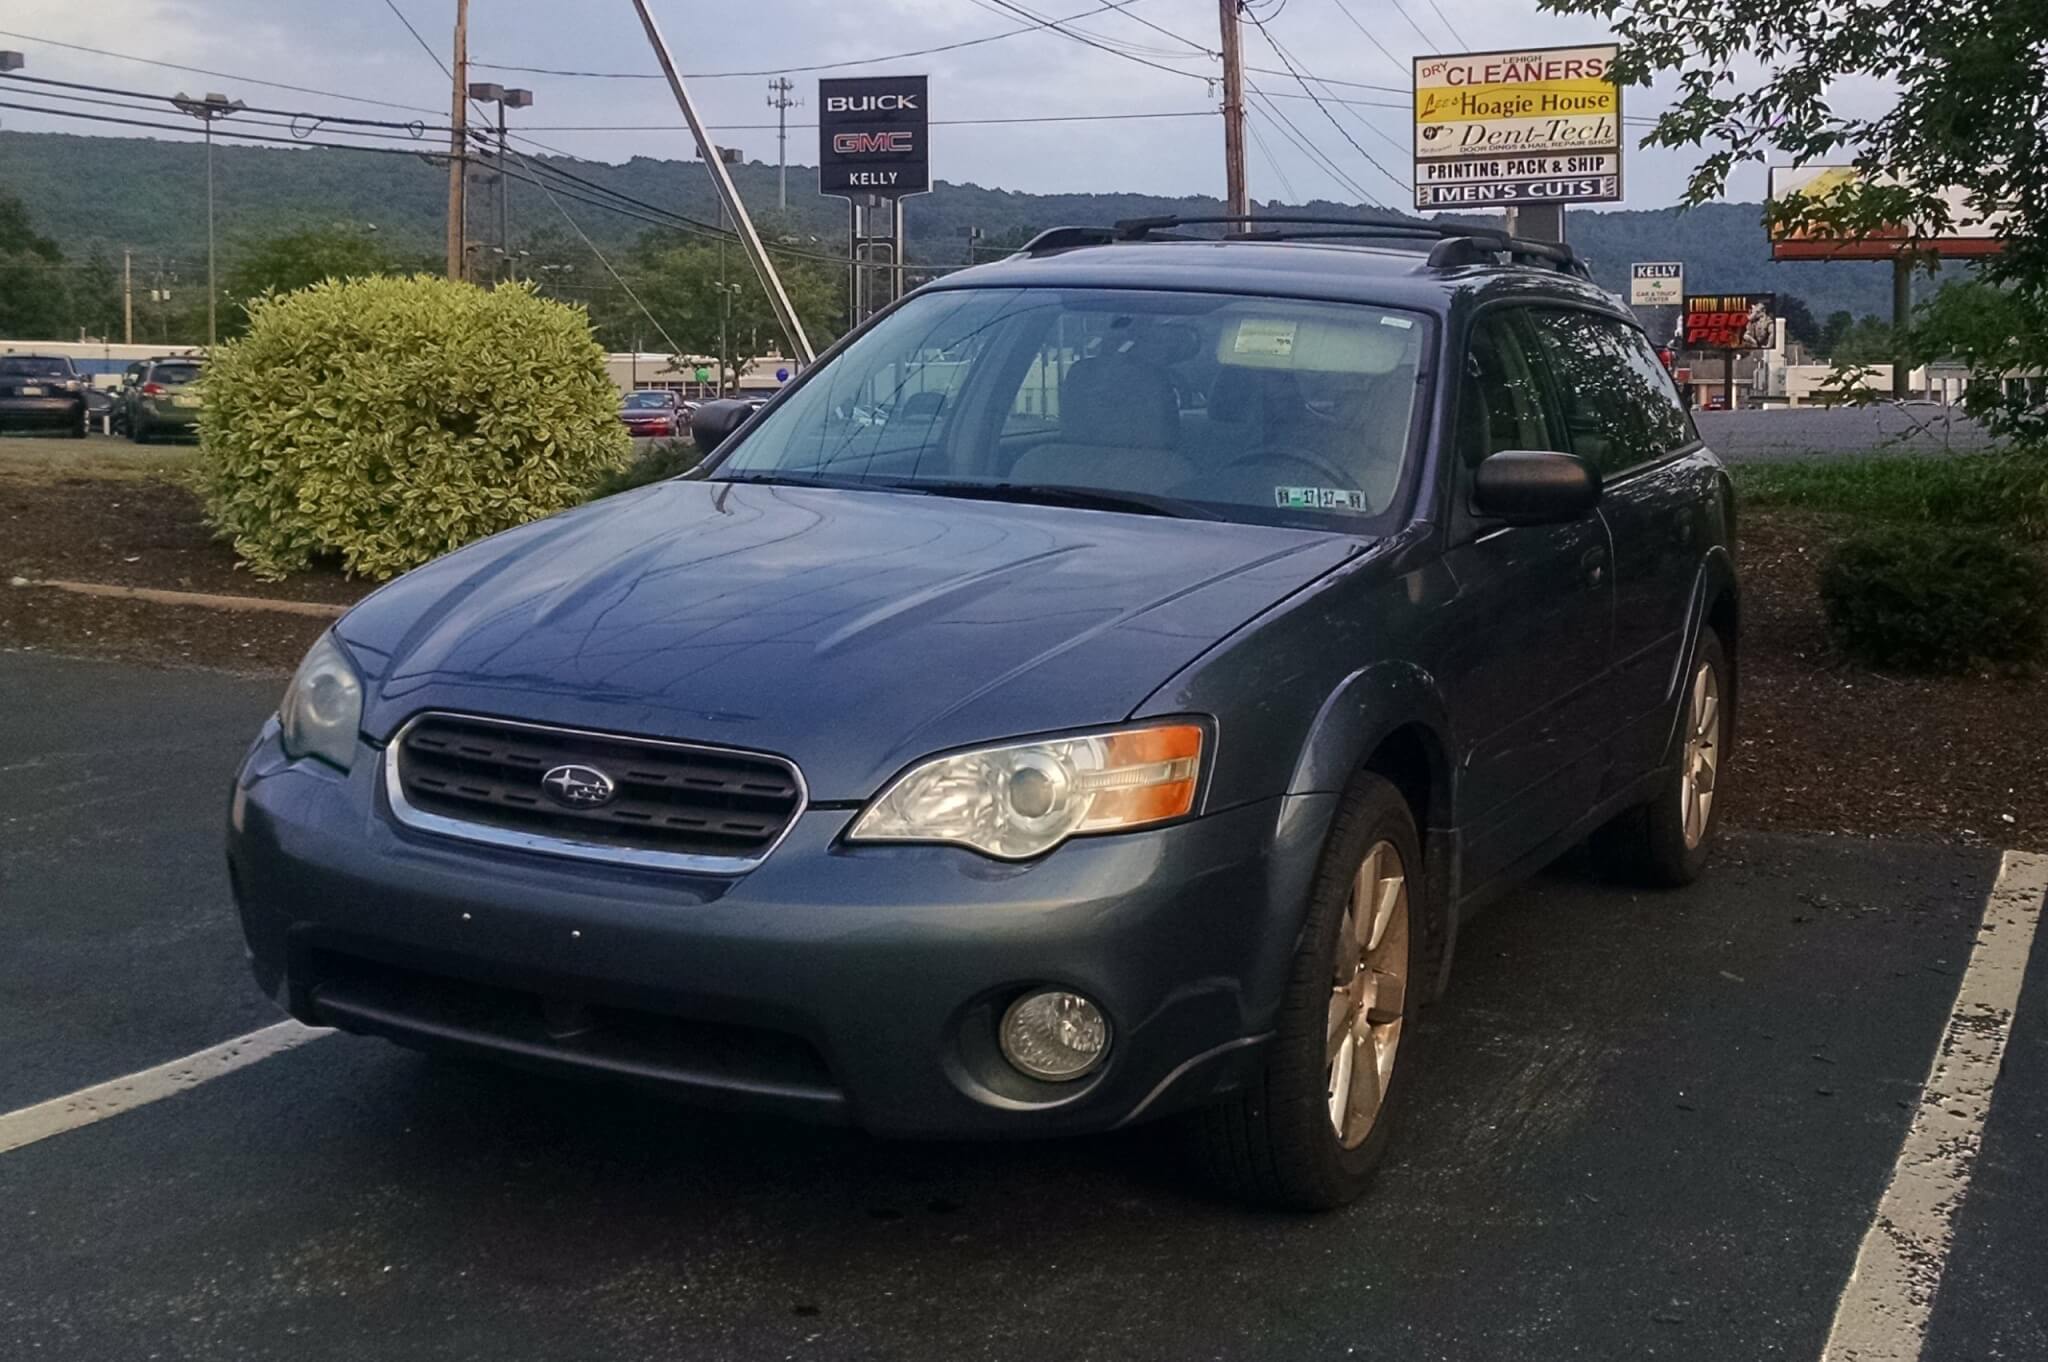 Subaru Outback in parking lot